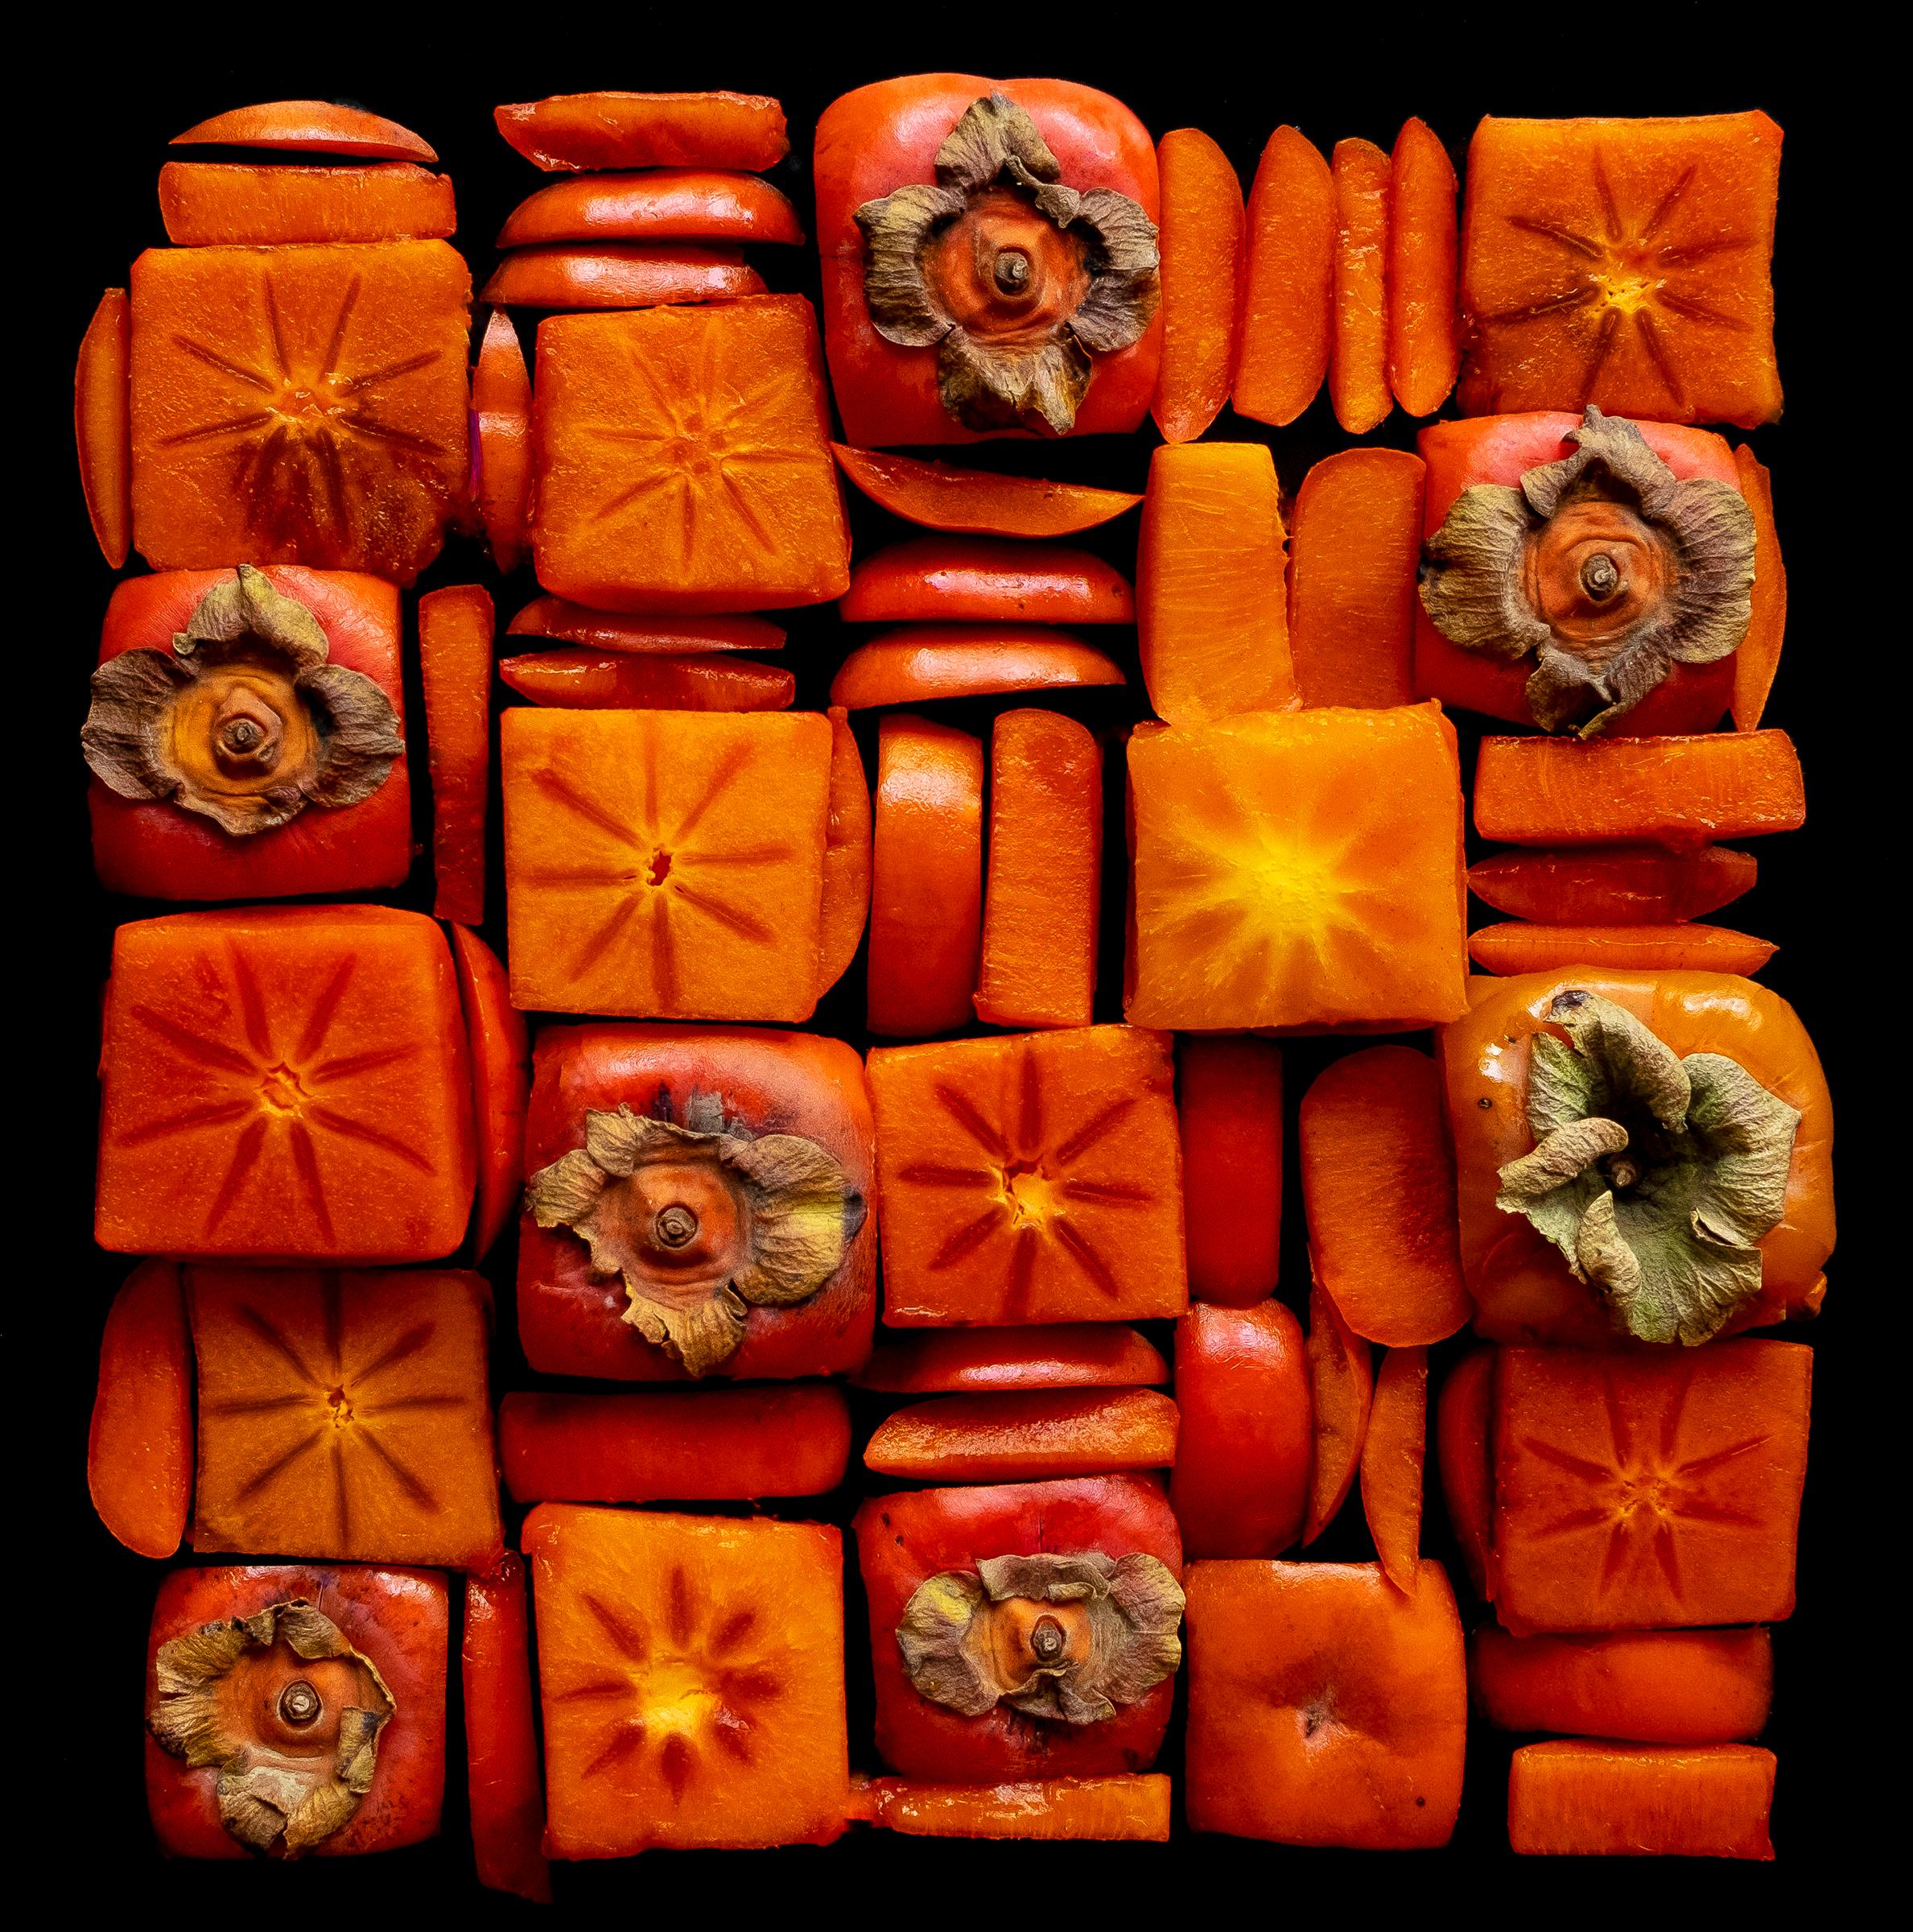 Sarah Phillips celebrates the imperfectability of organic design in her "Ugly Produce" photographs. Fresh, vibrant, and slightly off-kilter, Phillips arranges her fruits and vegetables into dizzying, textile-like patterns and surreal scenes. Her